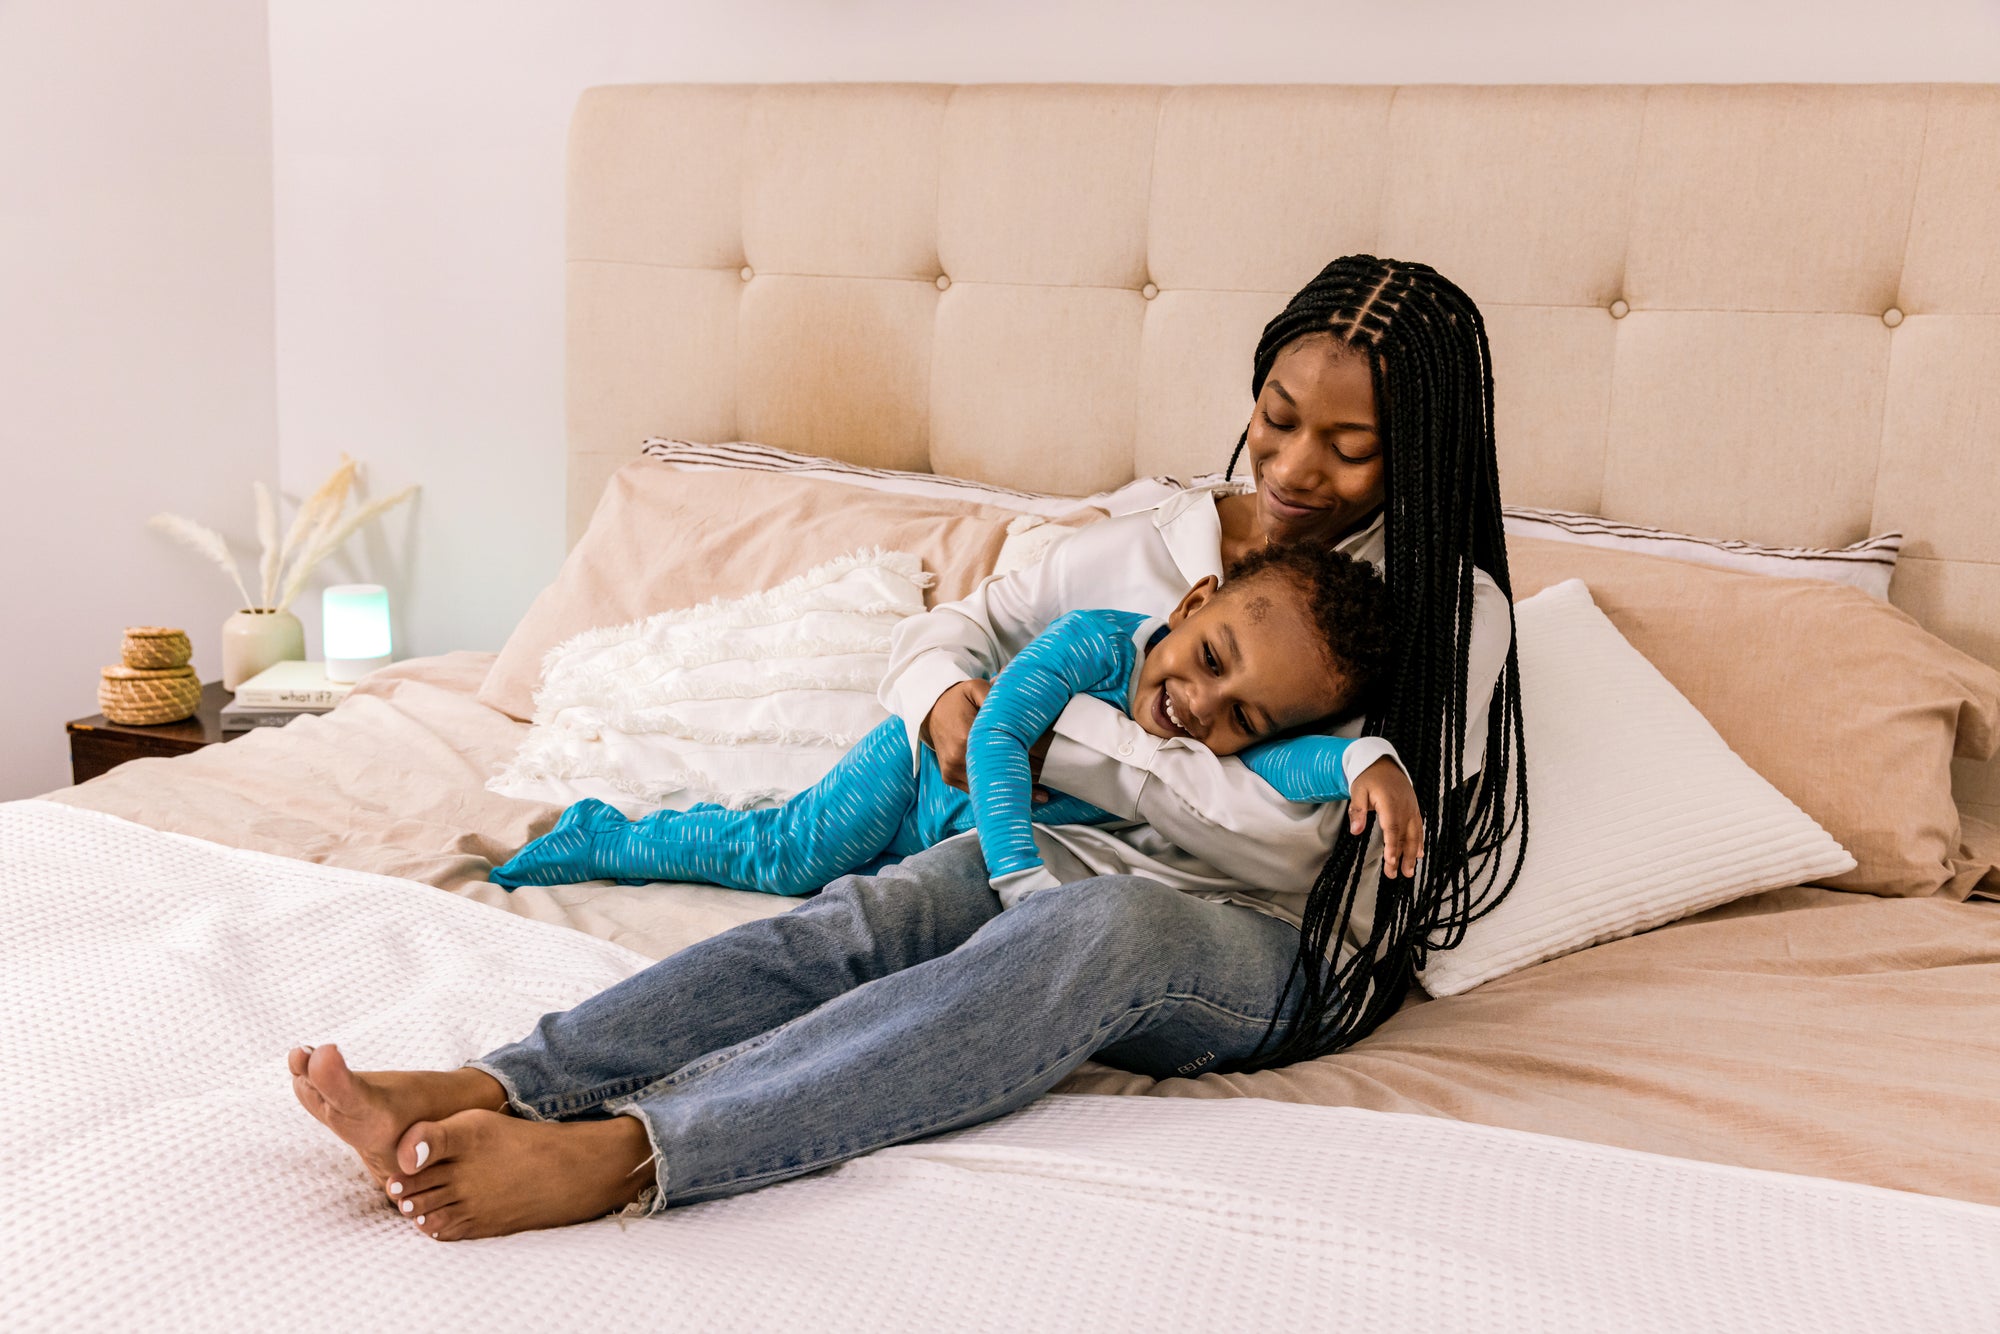 Mindful parenting: How to raise children in a home with happiness